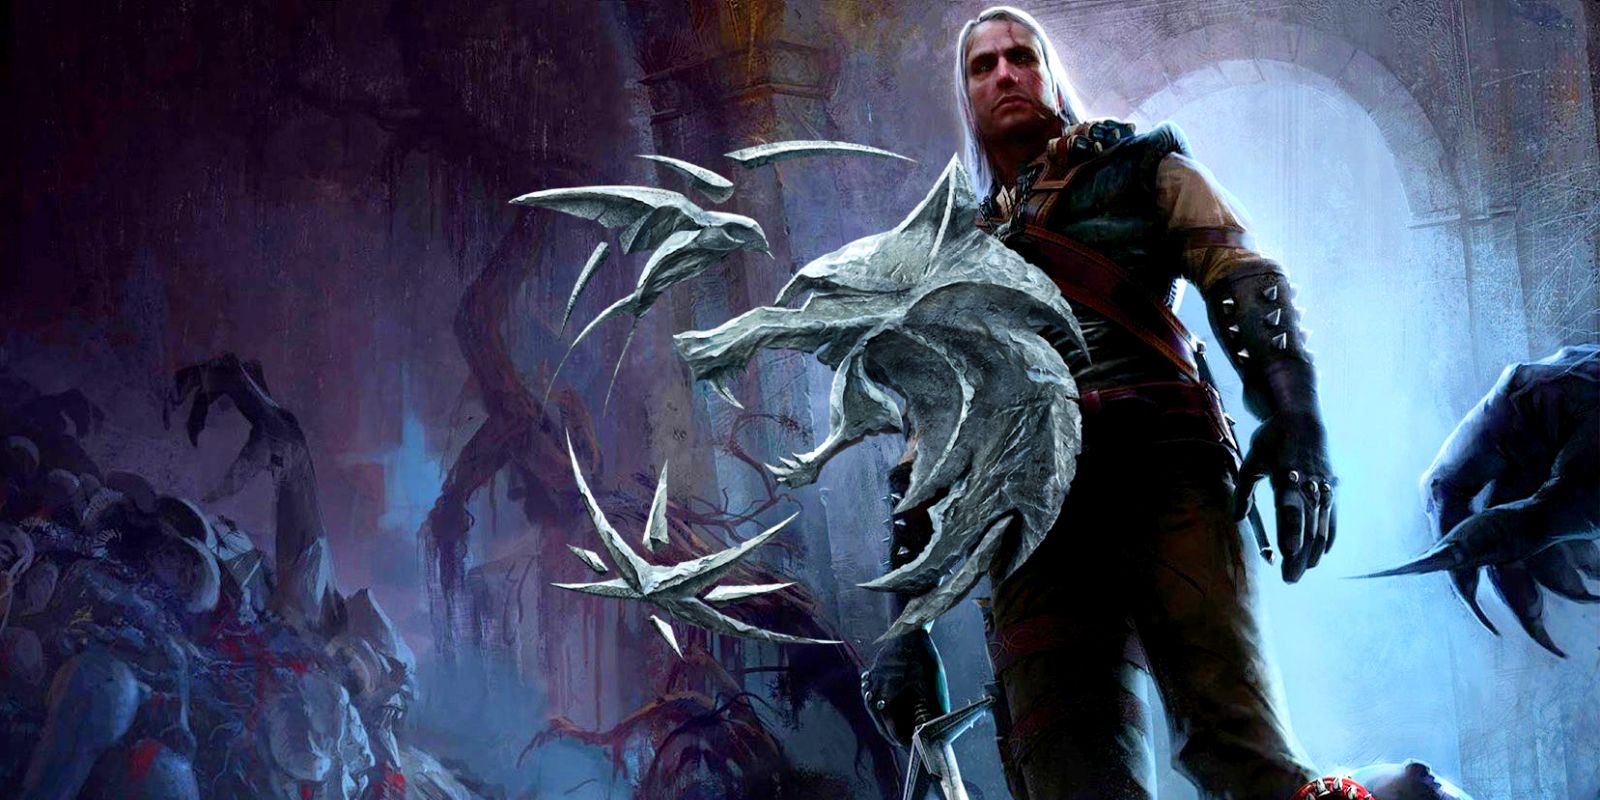 Artwork for the first Witcher game with the logo for Netflix's adaption of the novels.